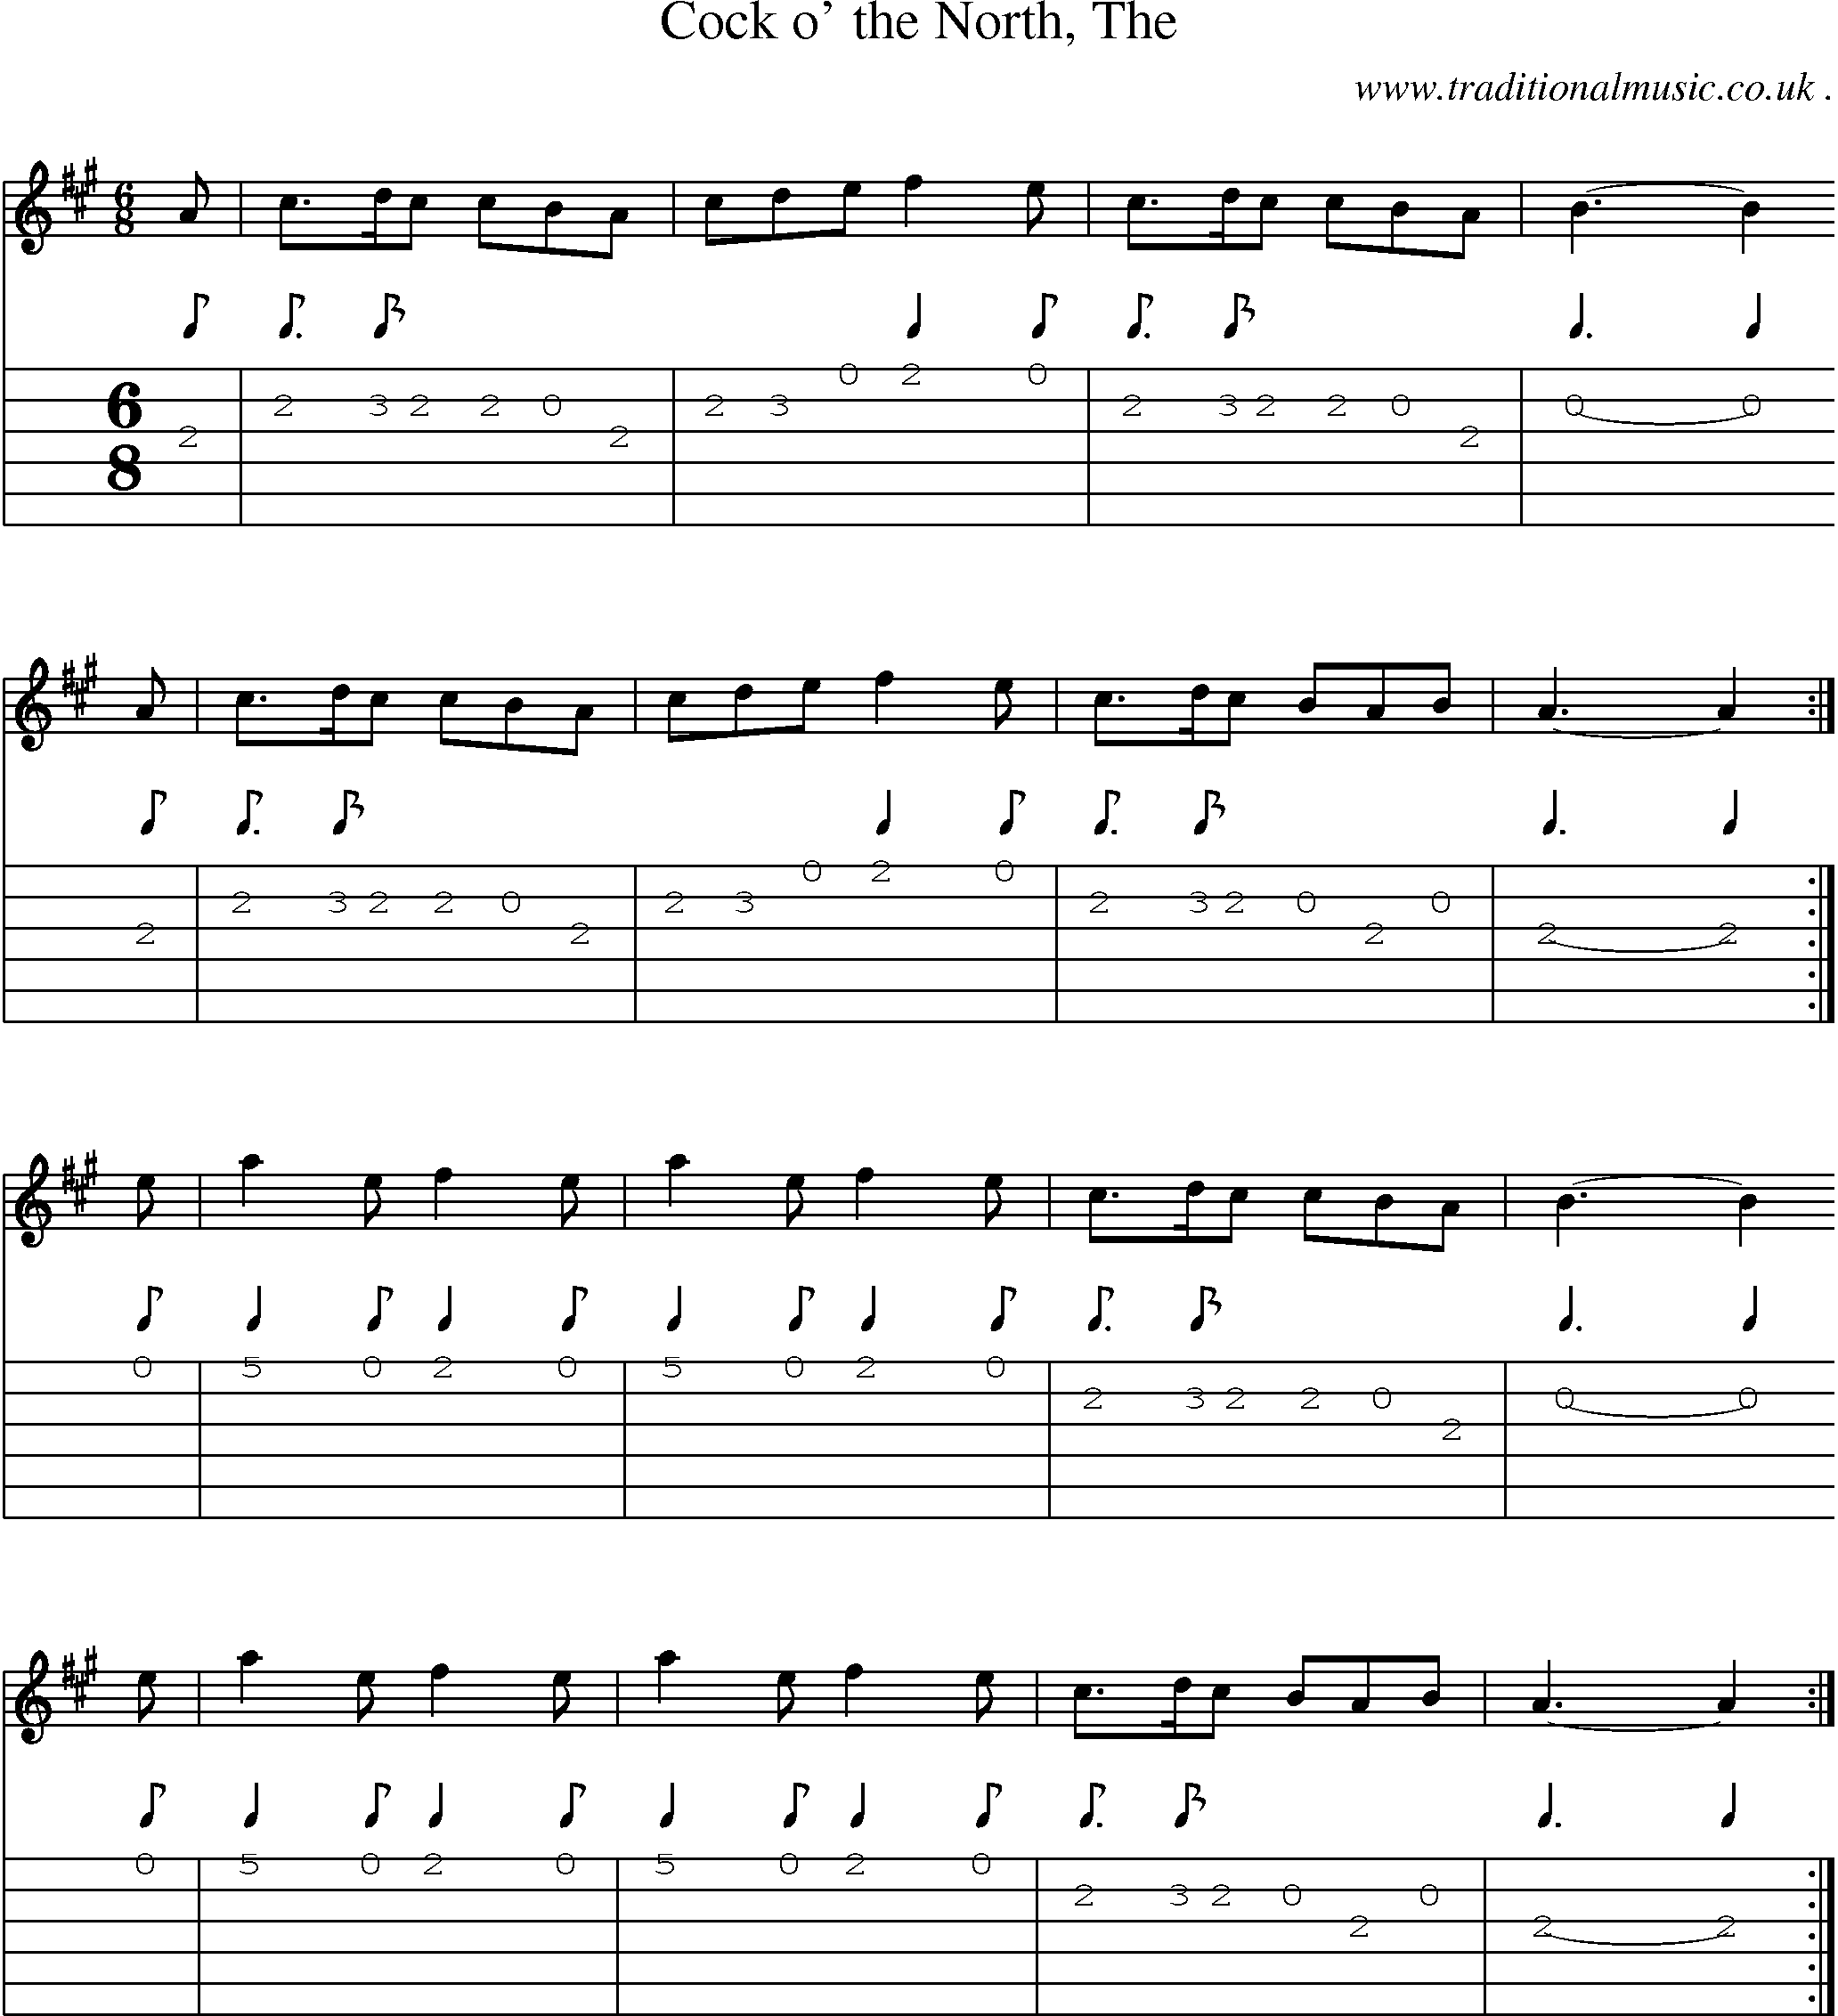 Sheet-music  score, Chords and Guitar Tabs for Cock O The North The